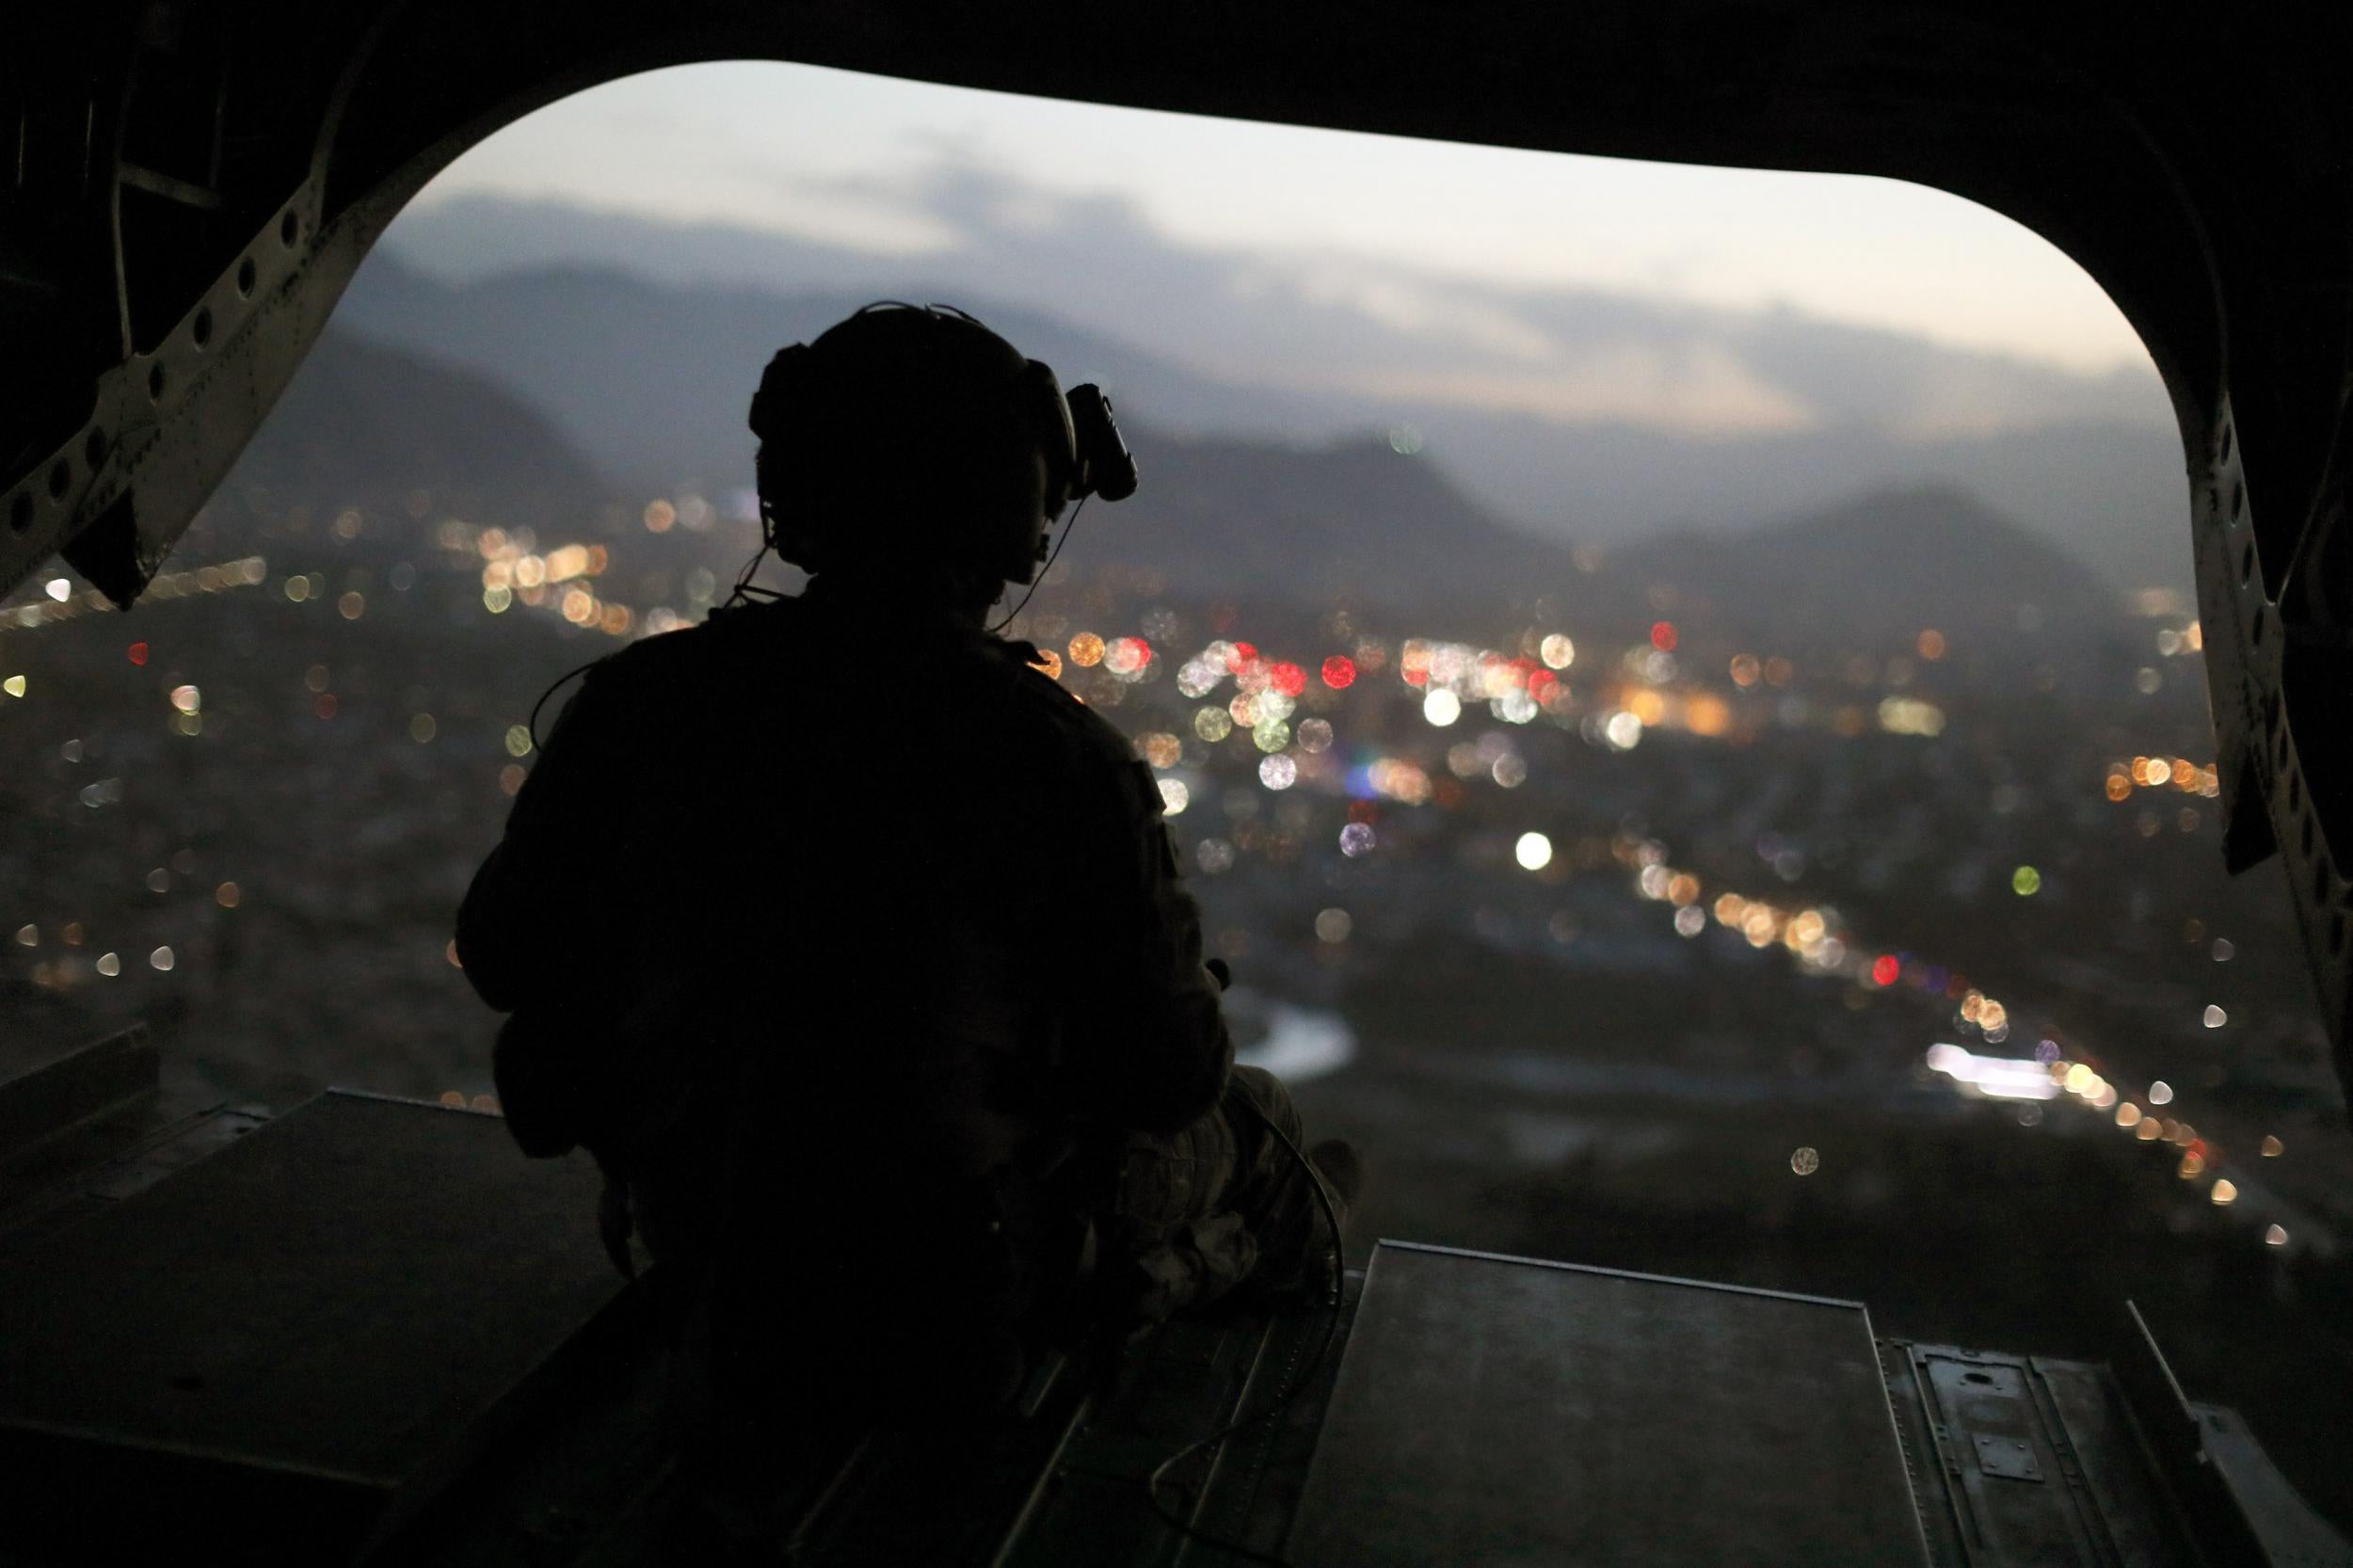 An Army crewman is seen on a military plane in Afghanistan